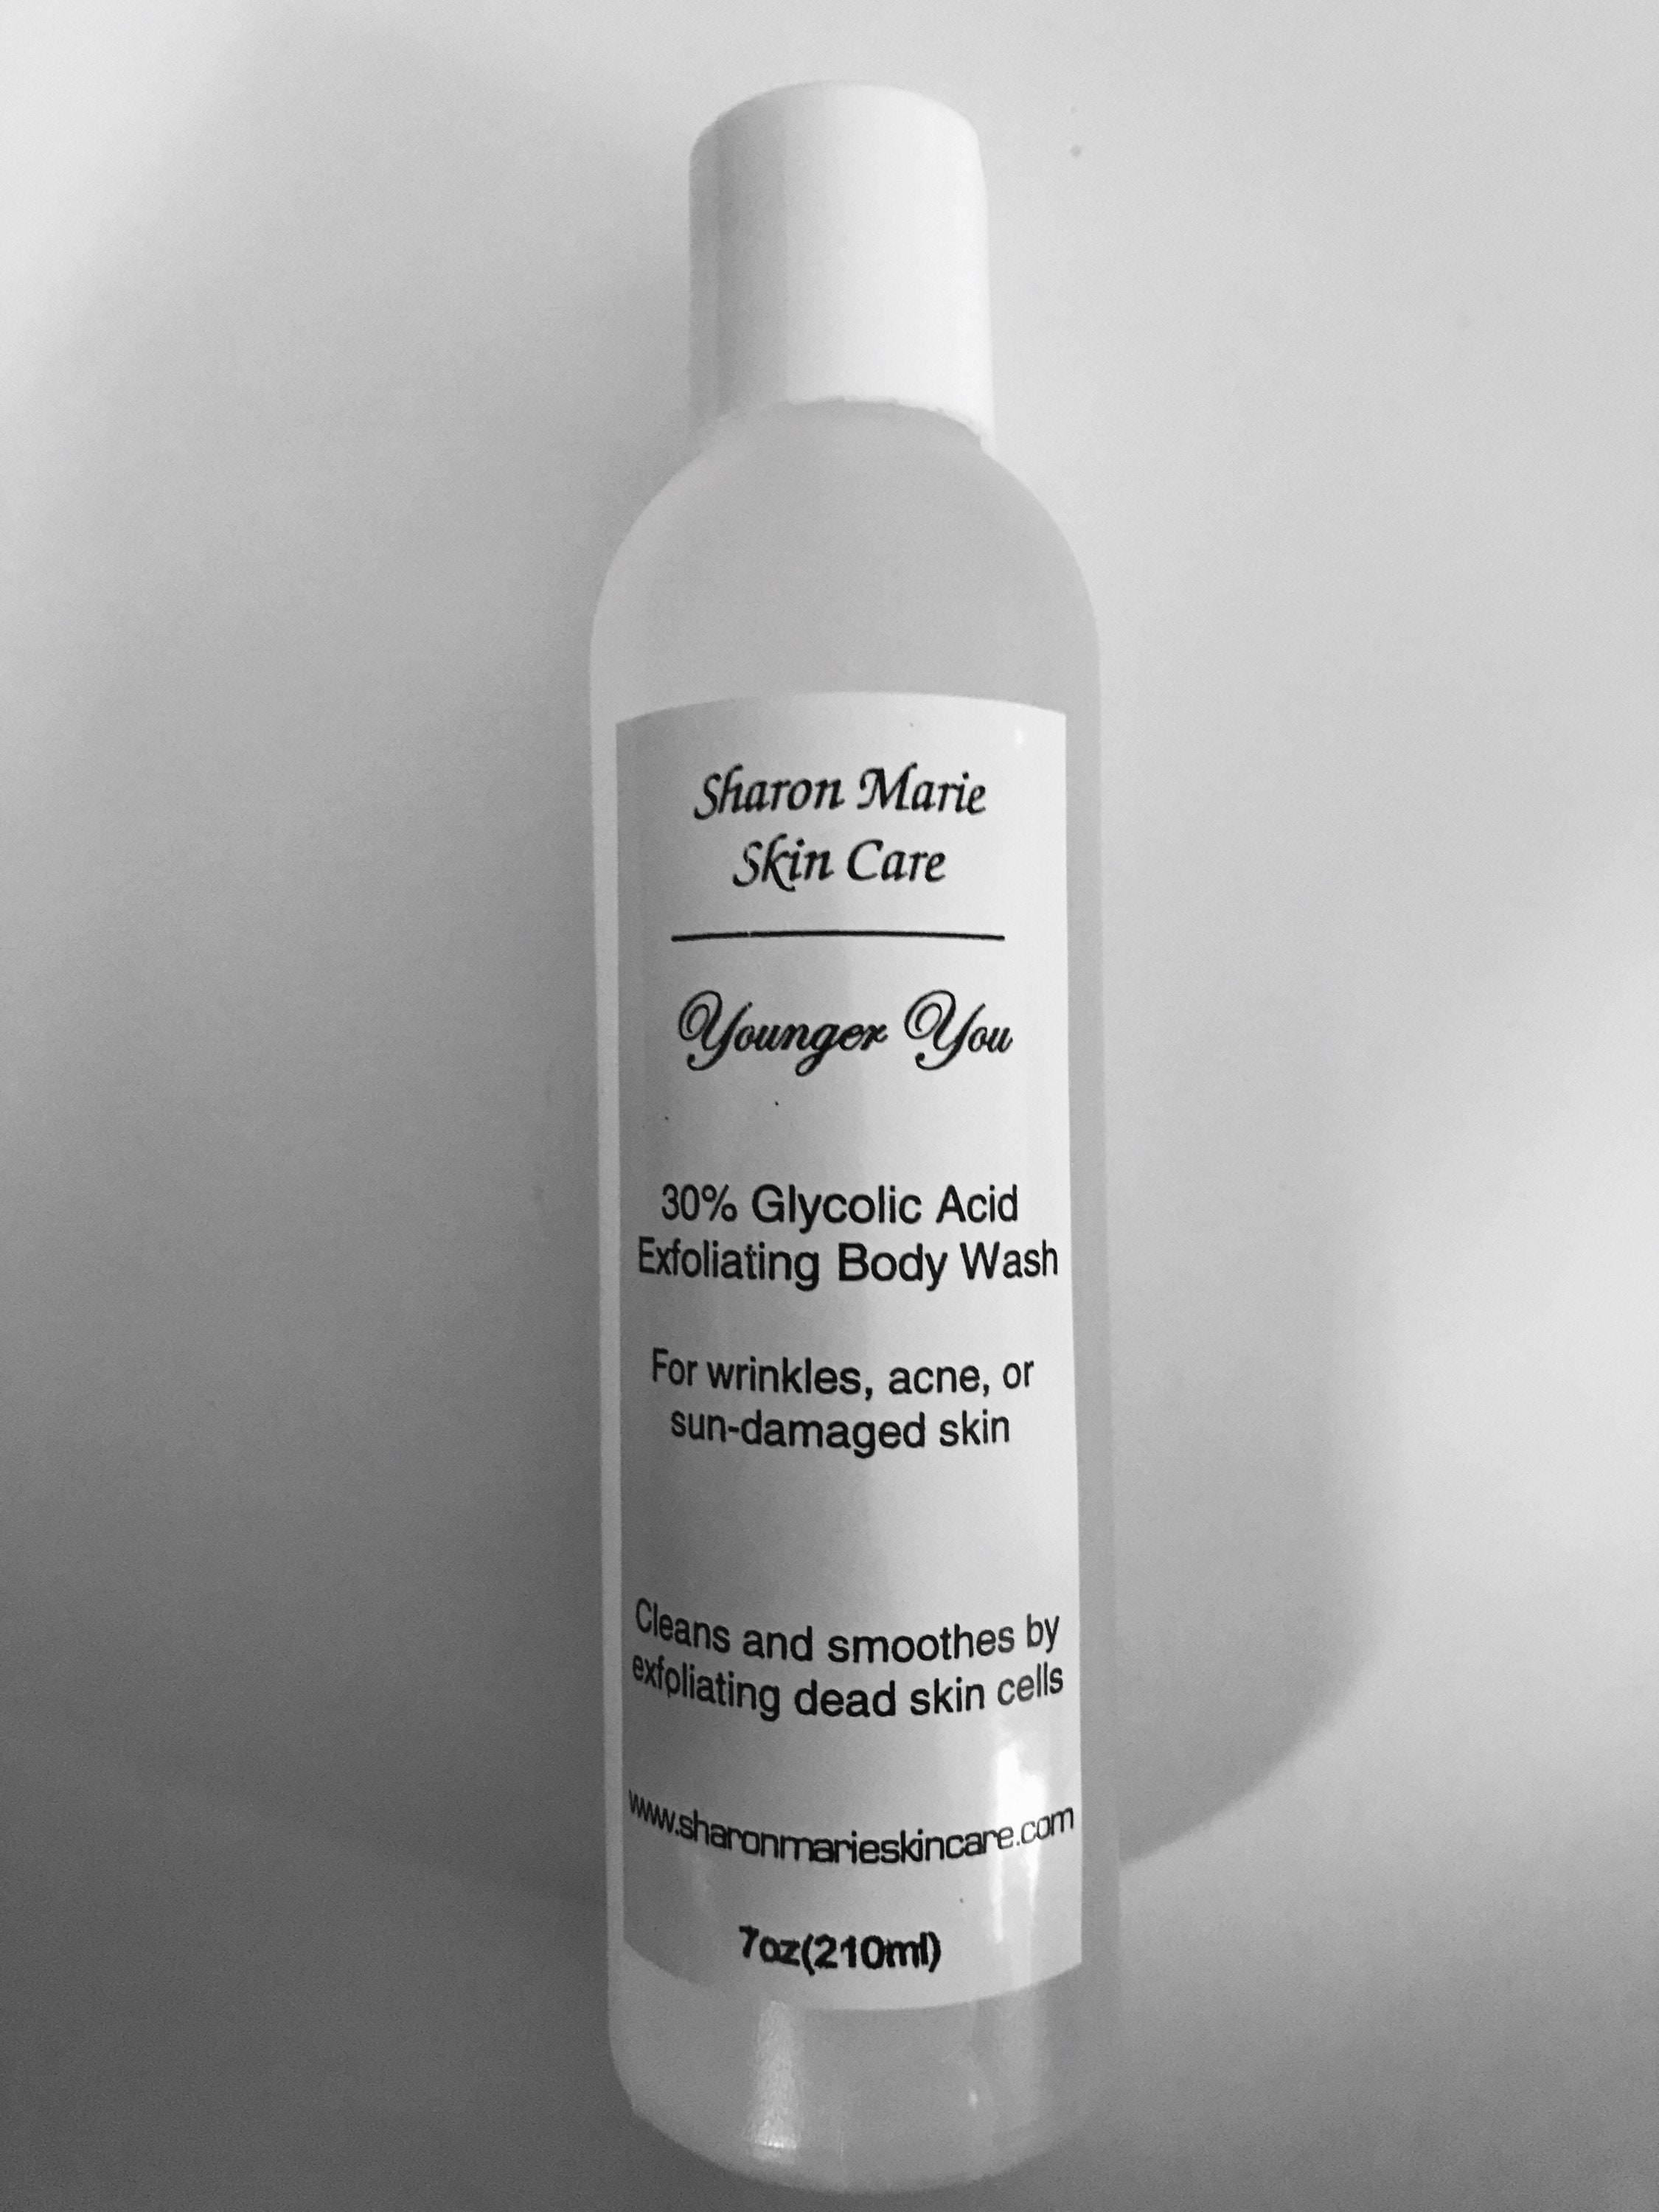 Body Wash and Peel With 30% Glycolic Acid pic